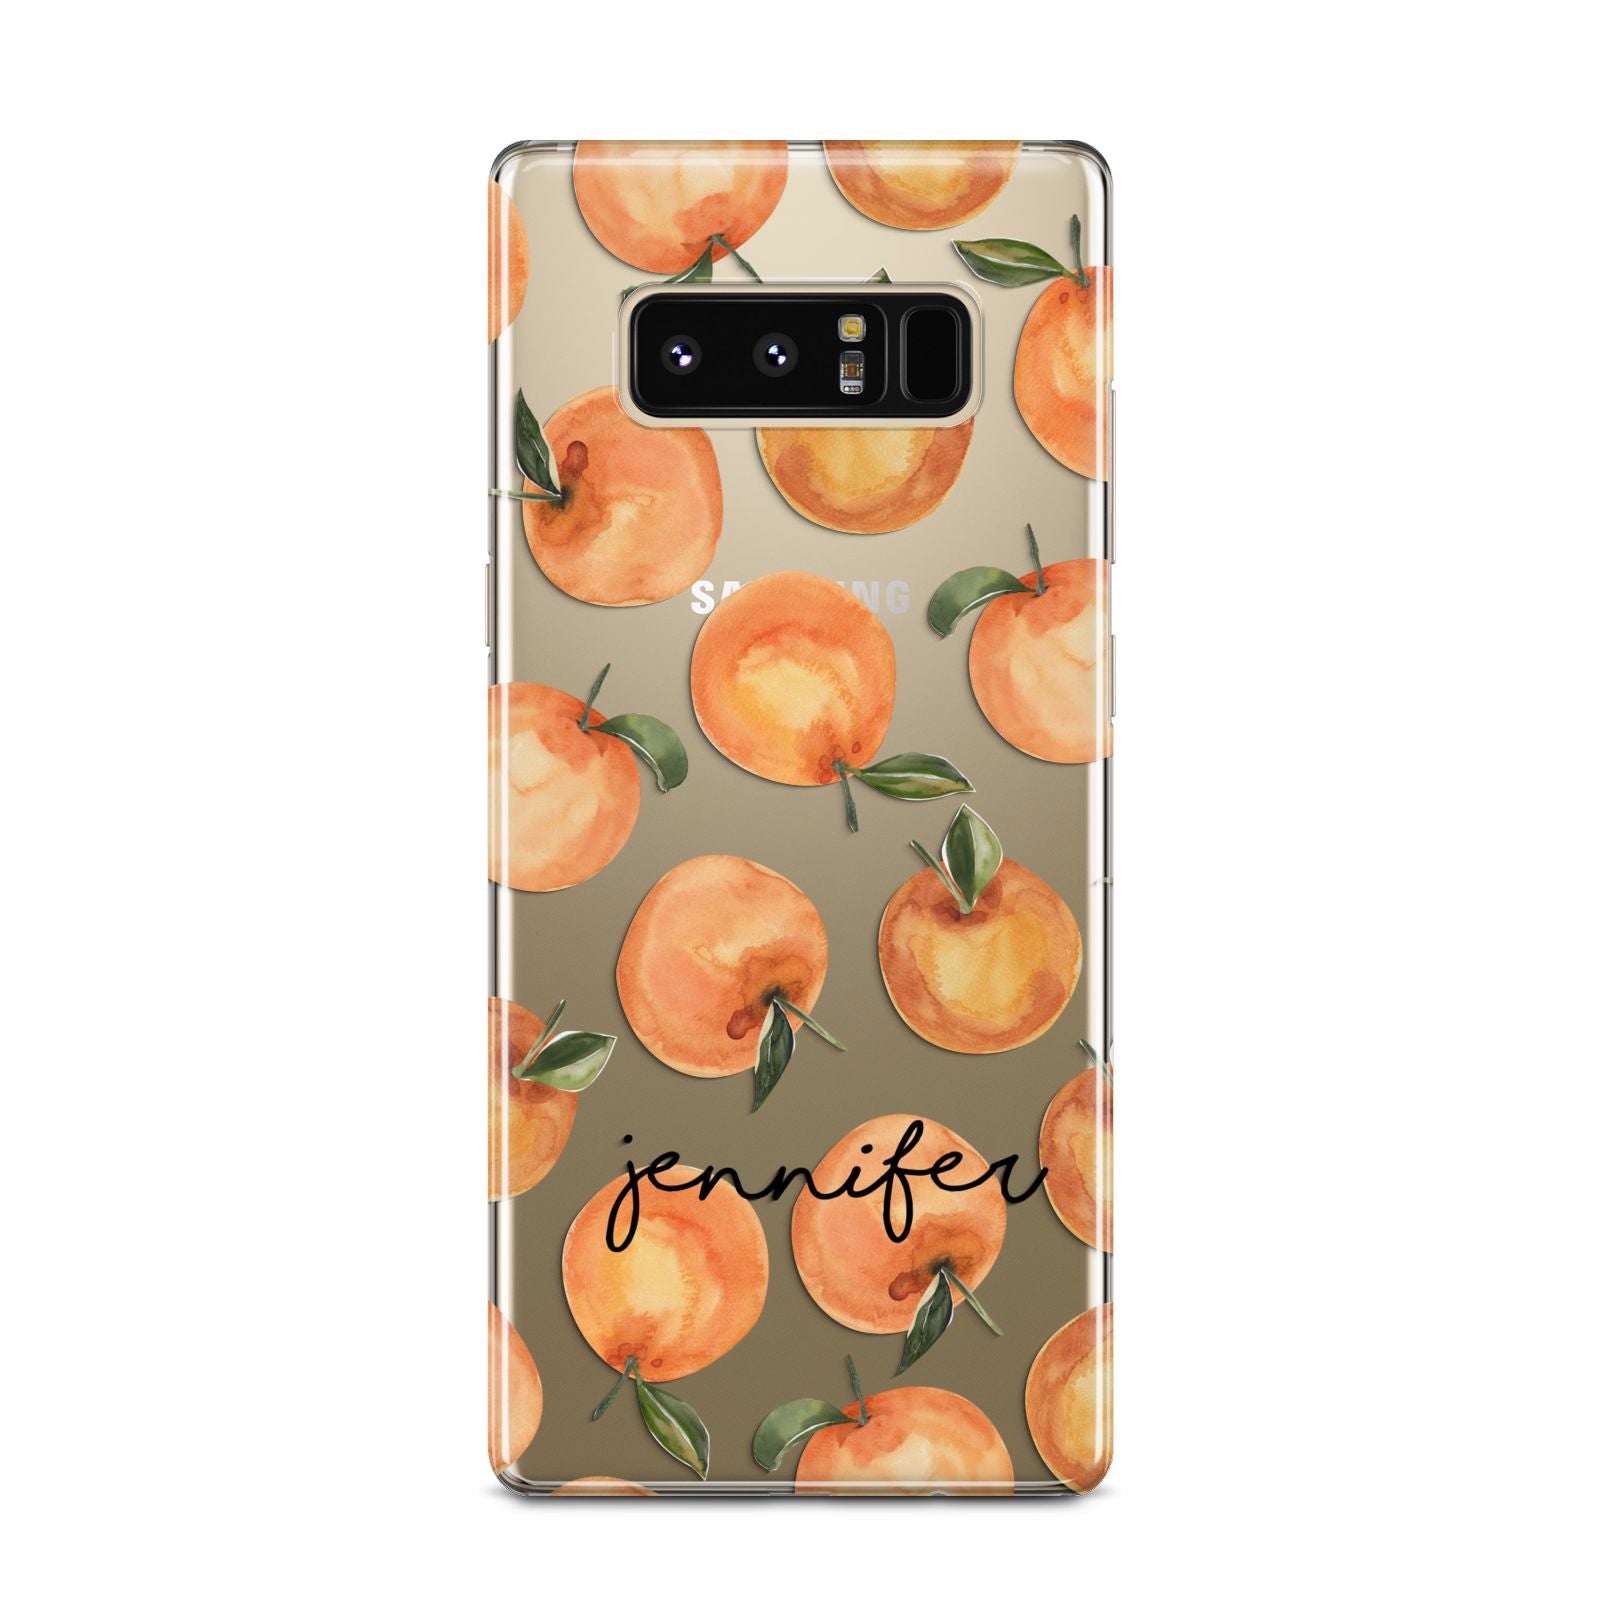 Personalised Oranges Name Samsung Galaxy Note 8 Case